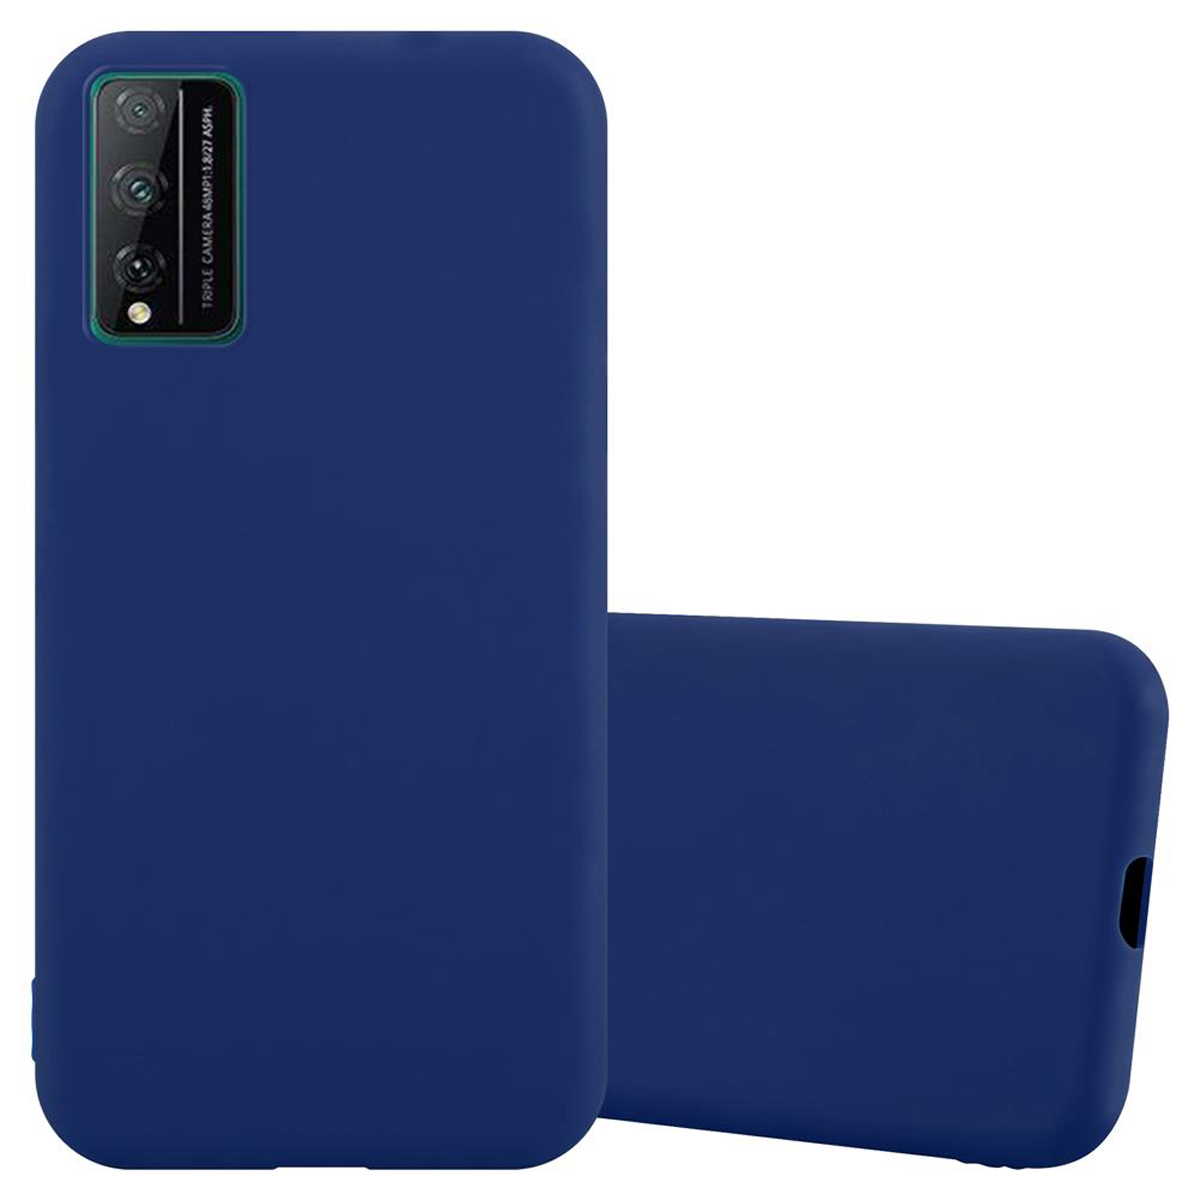 Style, im Honor, Candy CANDY Backcover, PRO, 4T TPU PLAY BLAU Hülle DUNKEL CADORABO